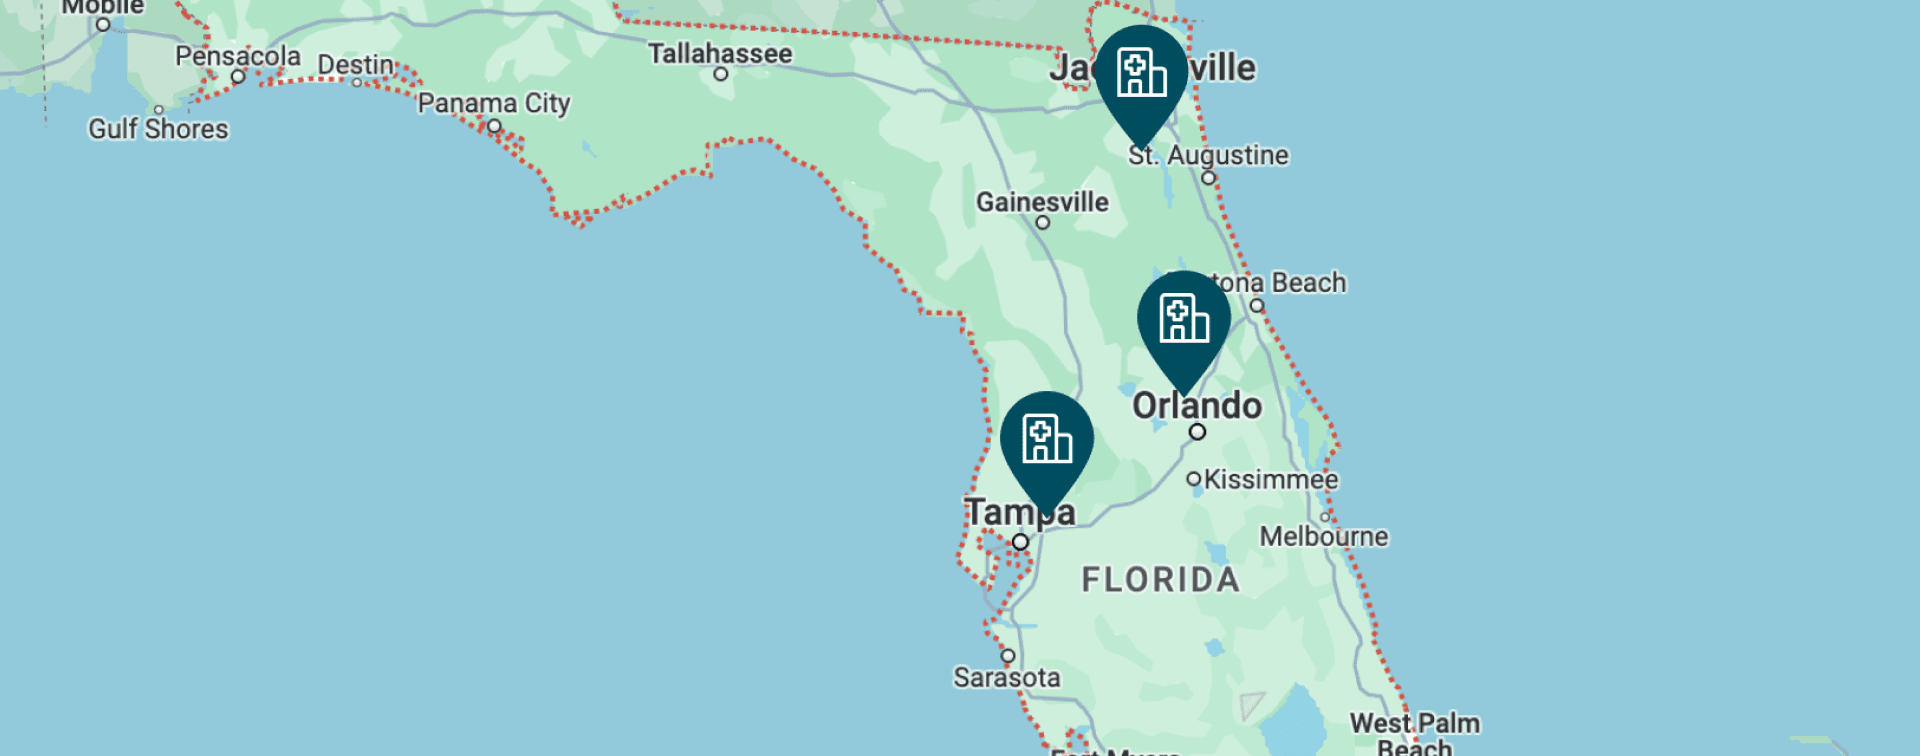 Florida map showing Walmart Health Center location pins in Tampa, Orlando and Jacksonville areas